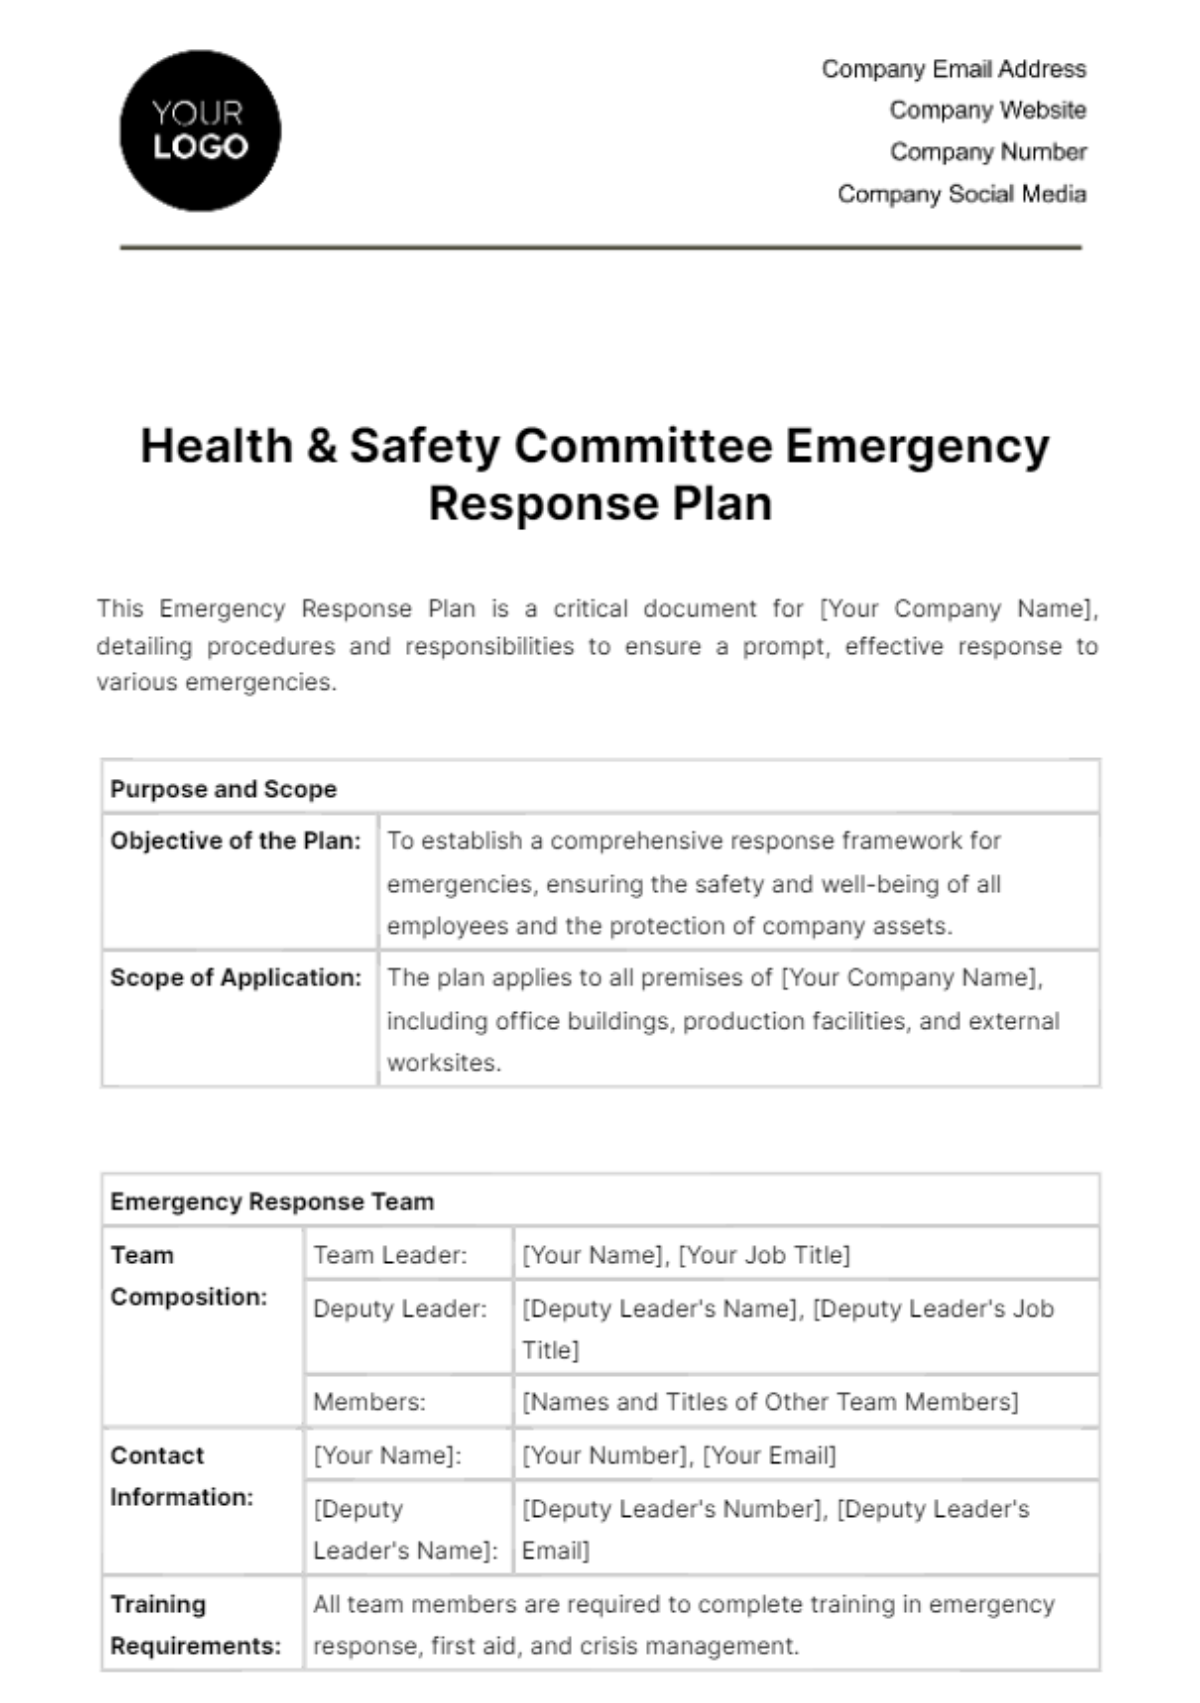 Health & Safety Committee Emergency Response Plan Template